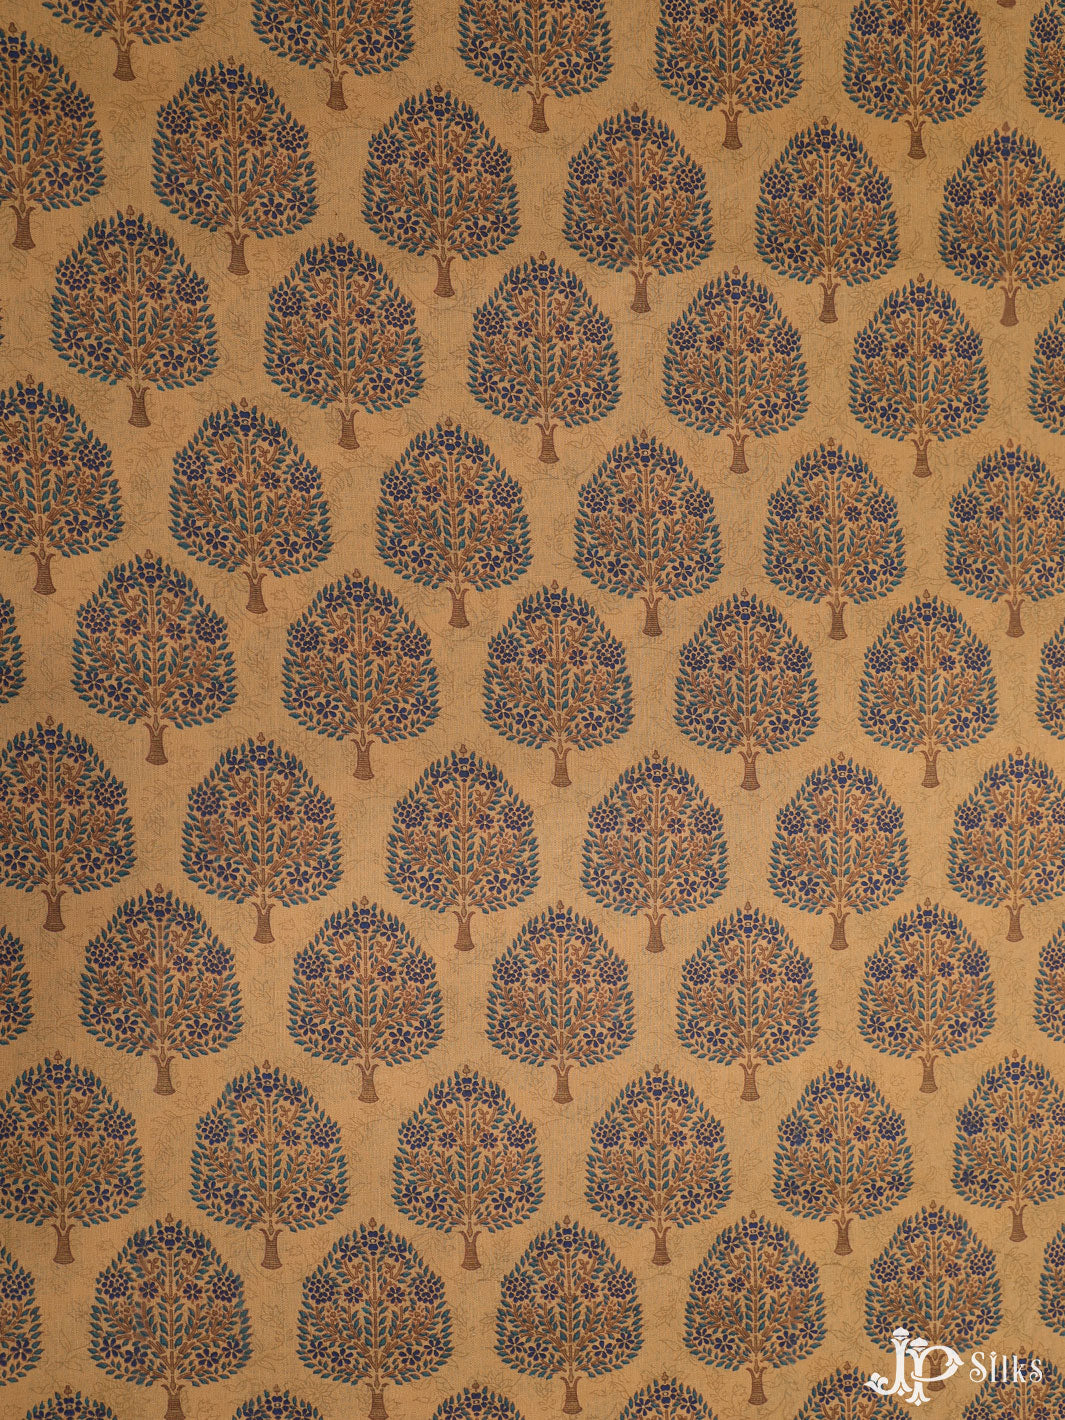 Dark Beige and Ink Blue Cotton Fabric - A7193 - View 1